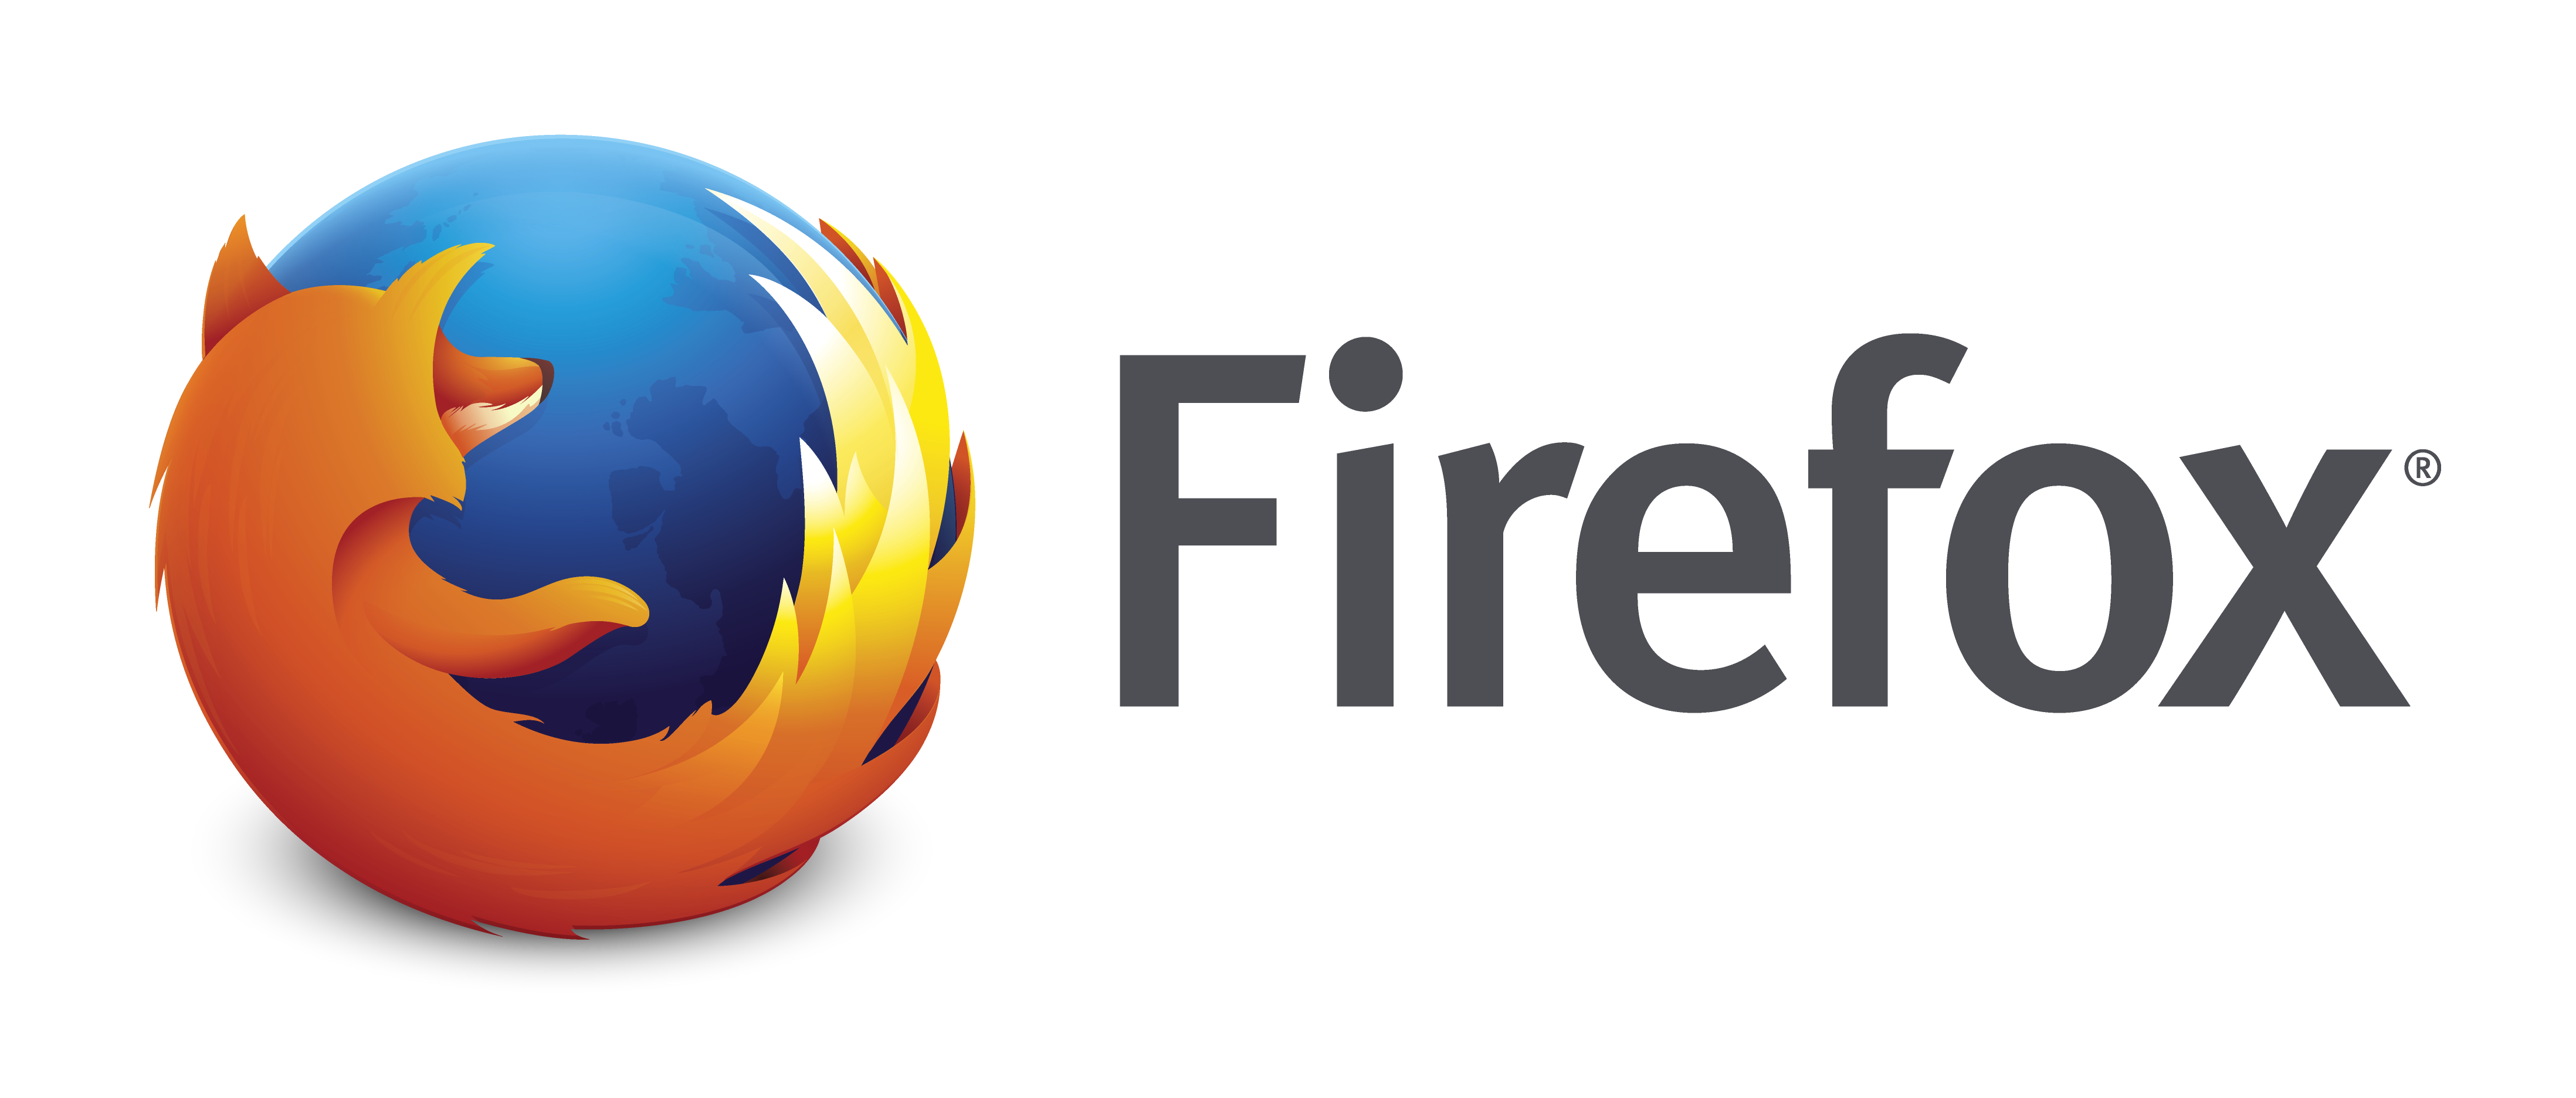 Quick JIRA @Add-Ons for Firefox